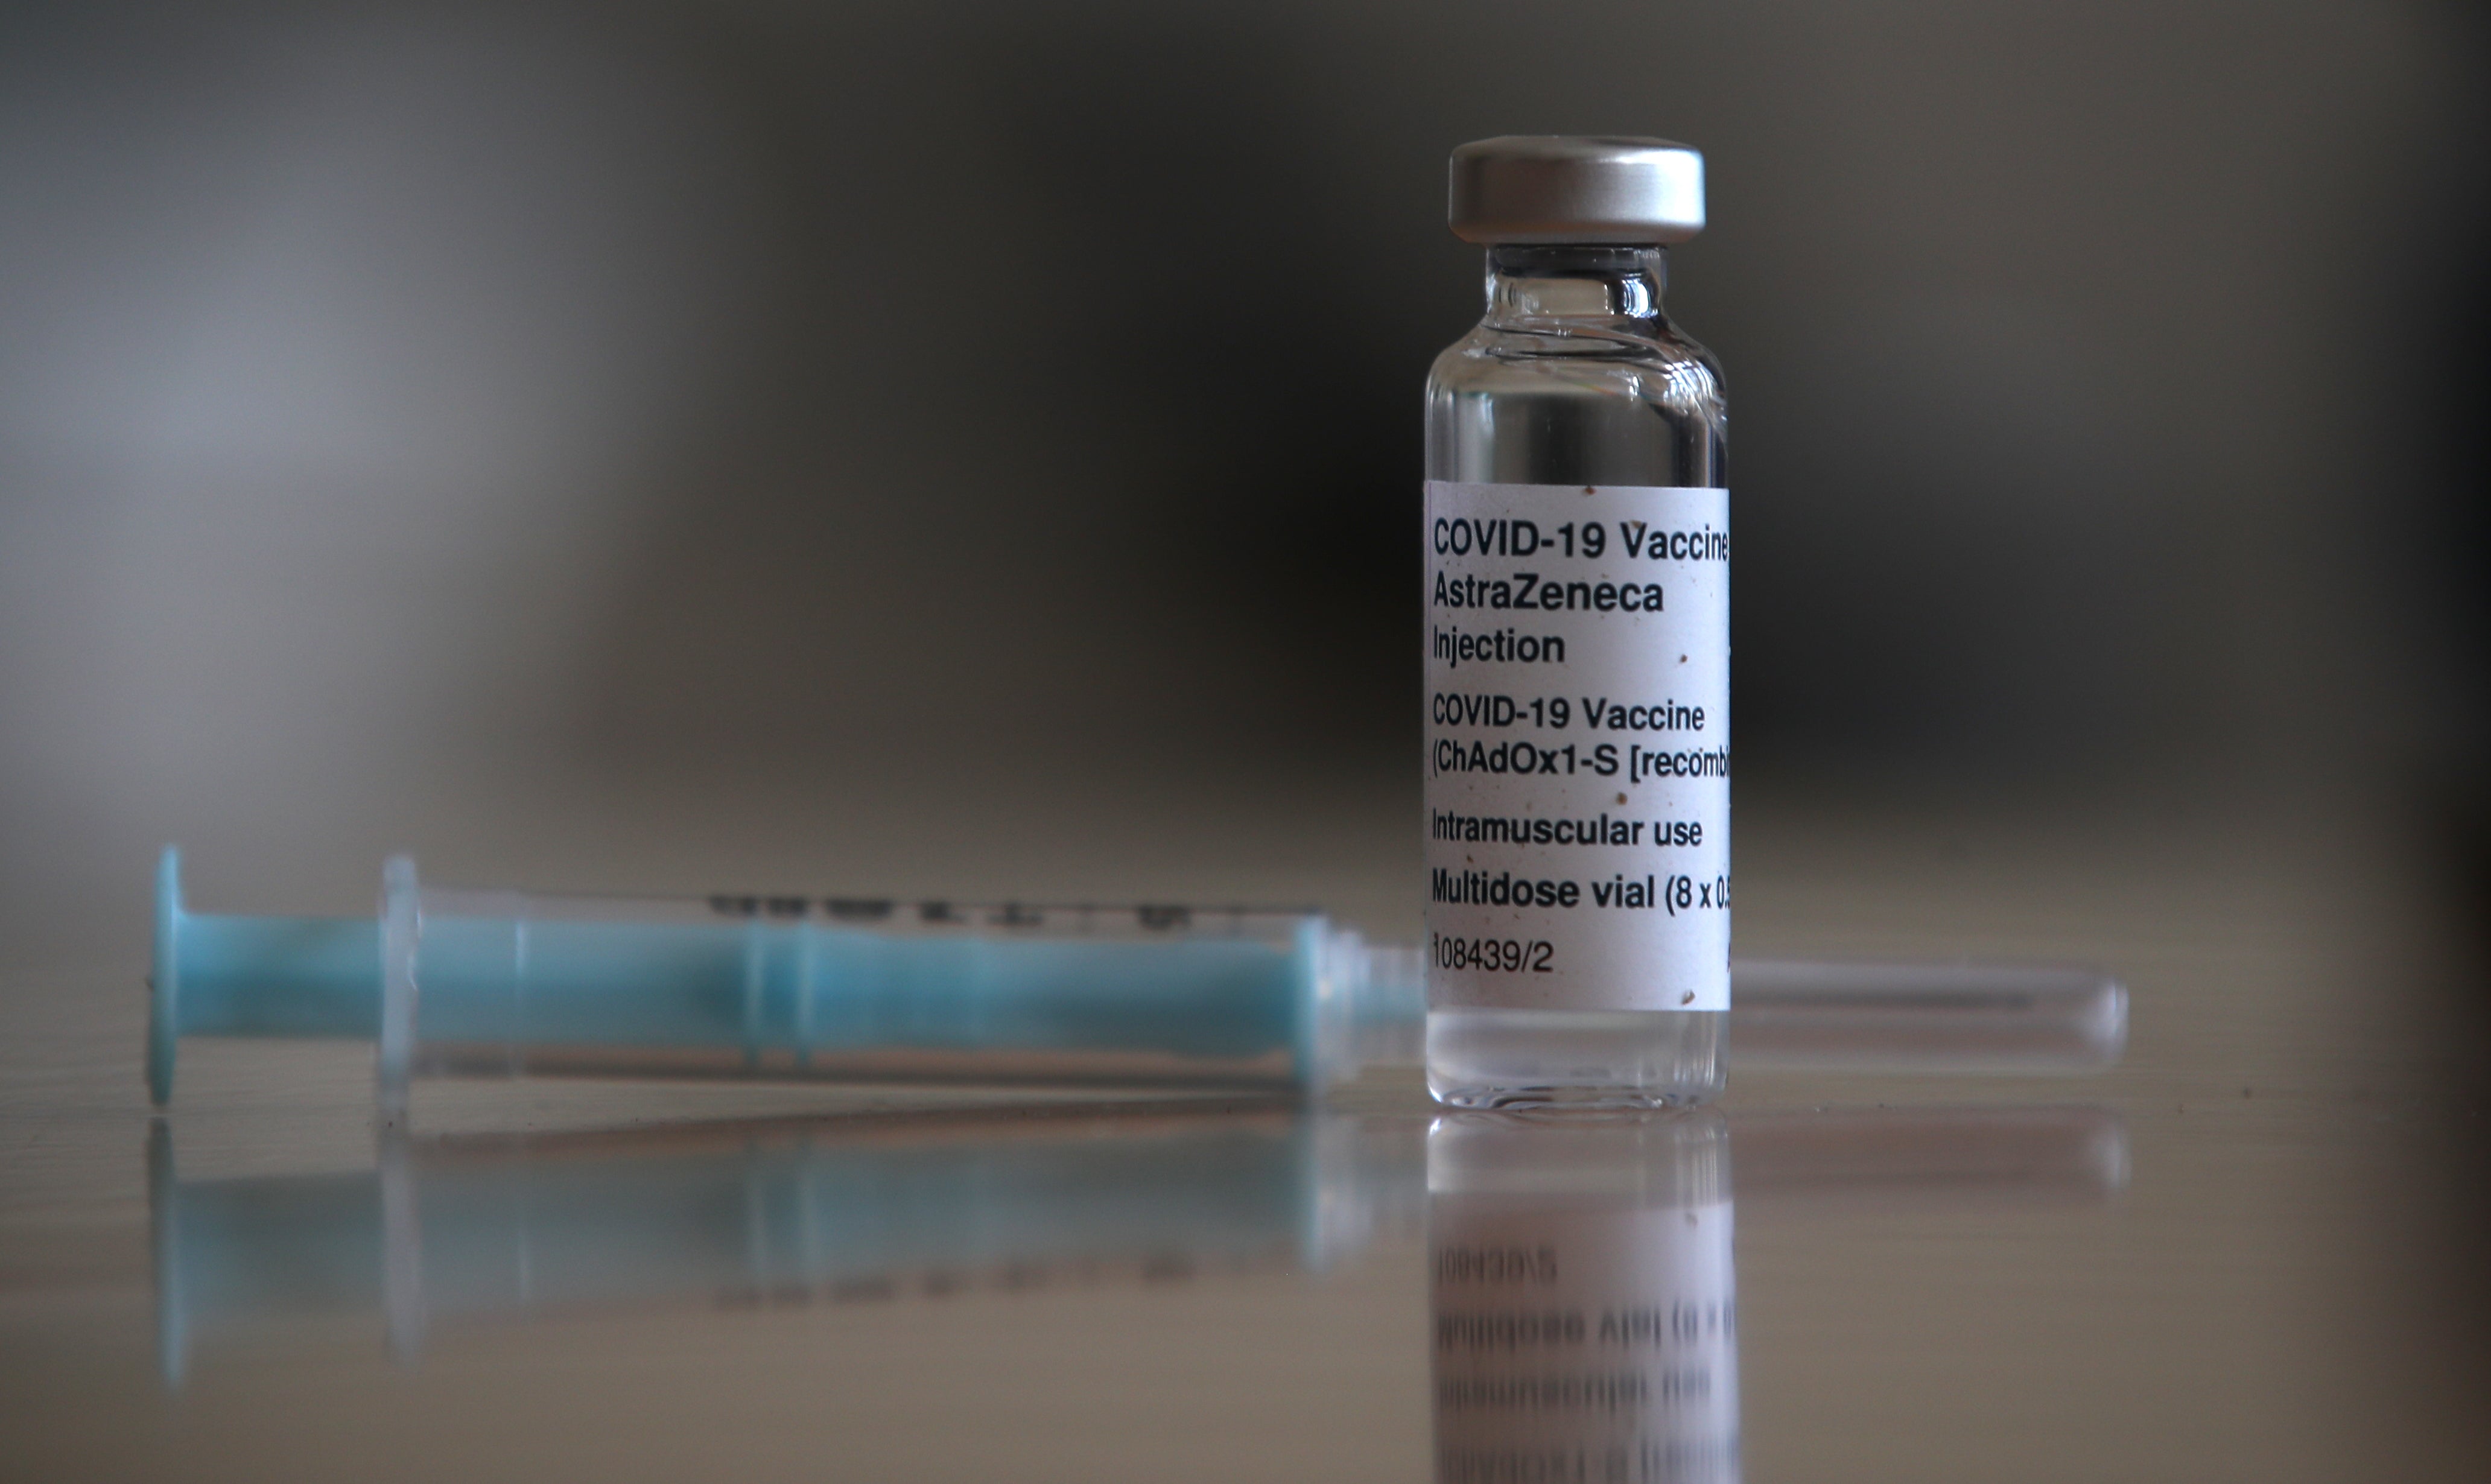 Only about 2.3 million Canadians ever received the AstraZeneca vaccine after public confidence in it fell